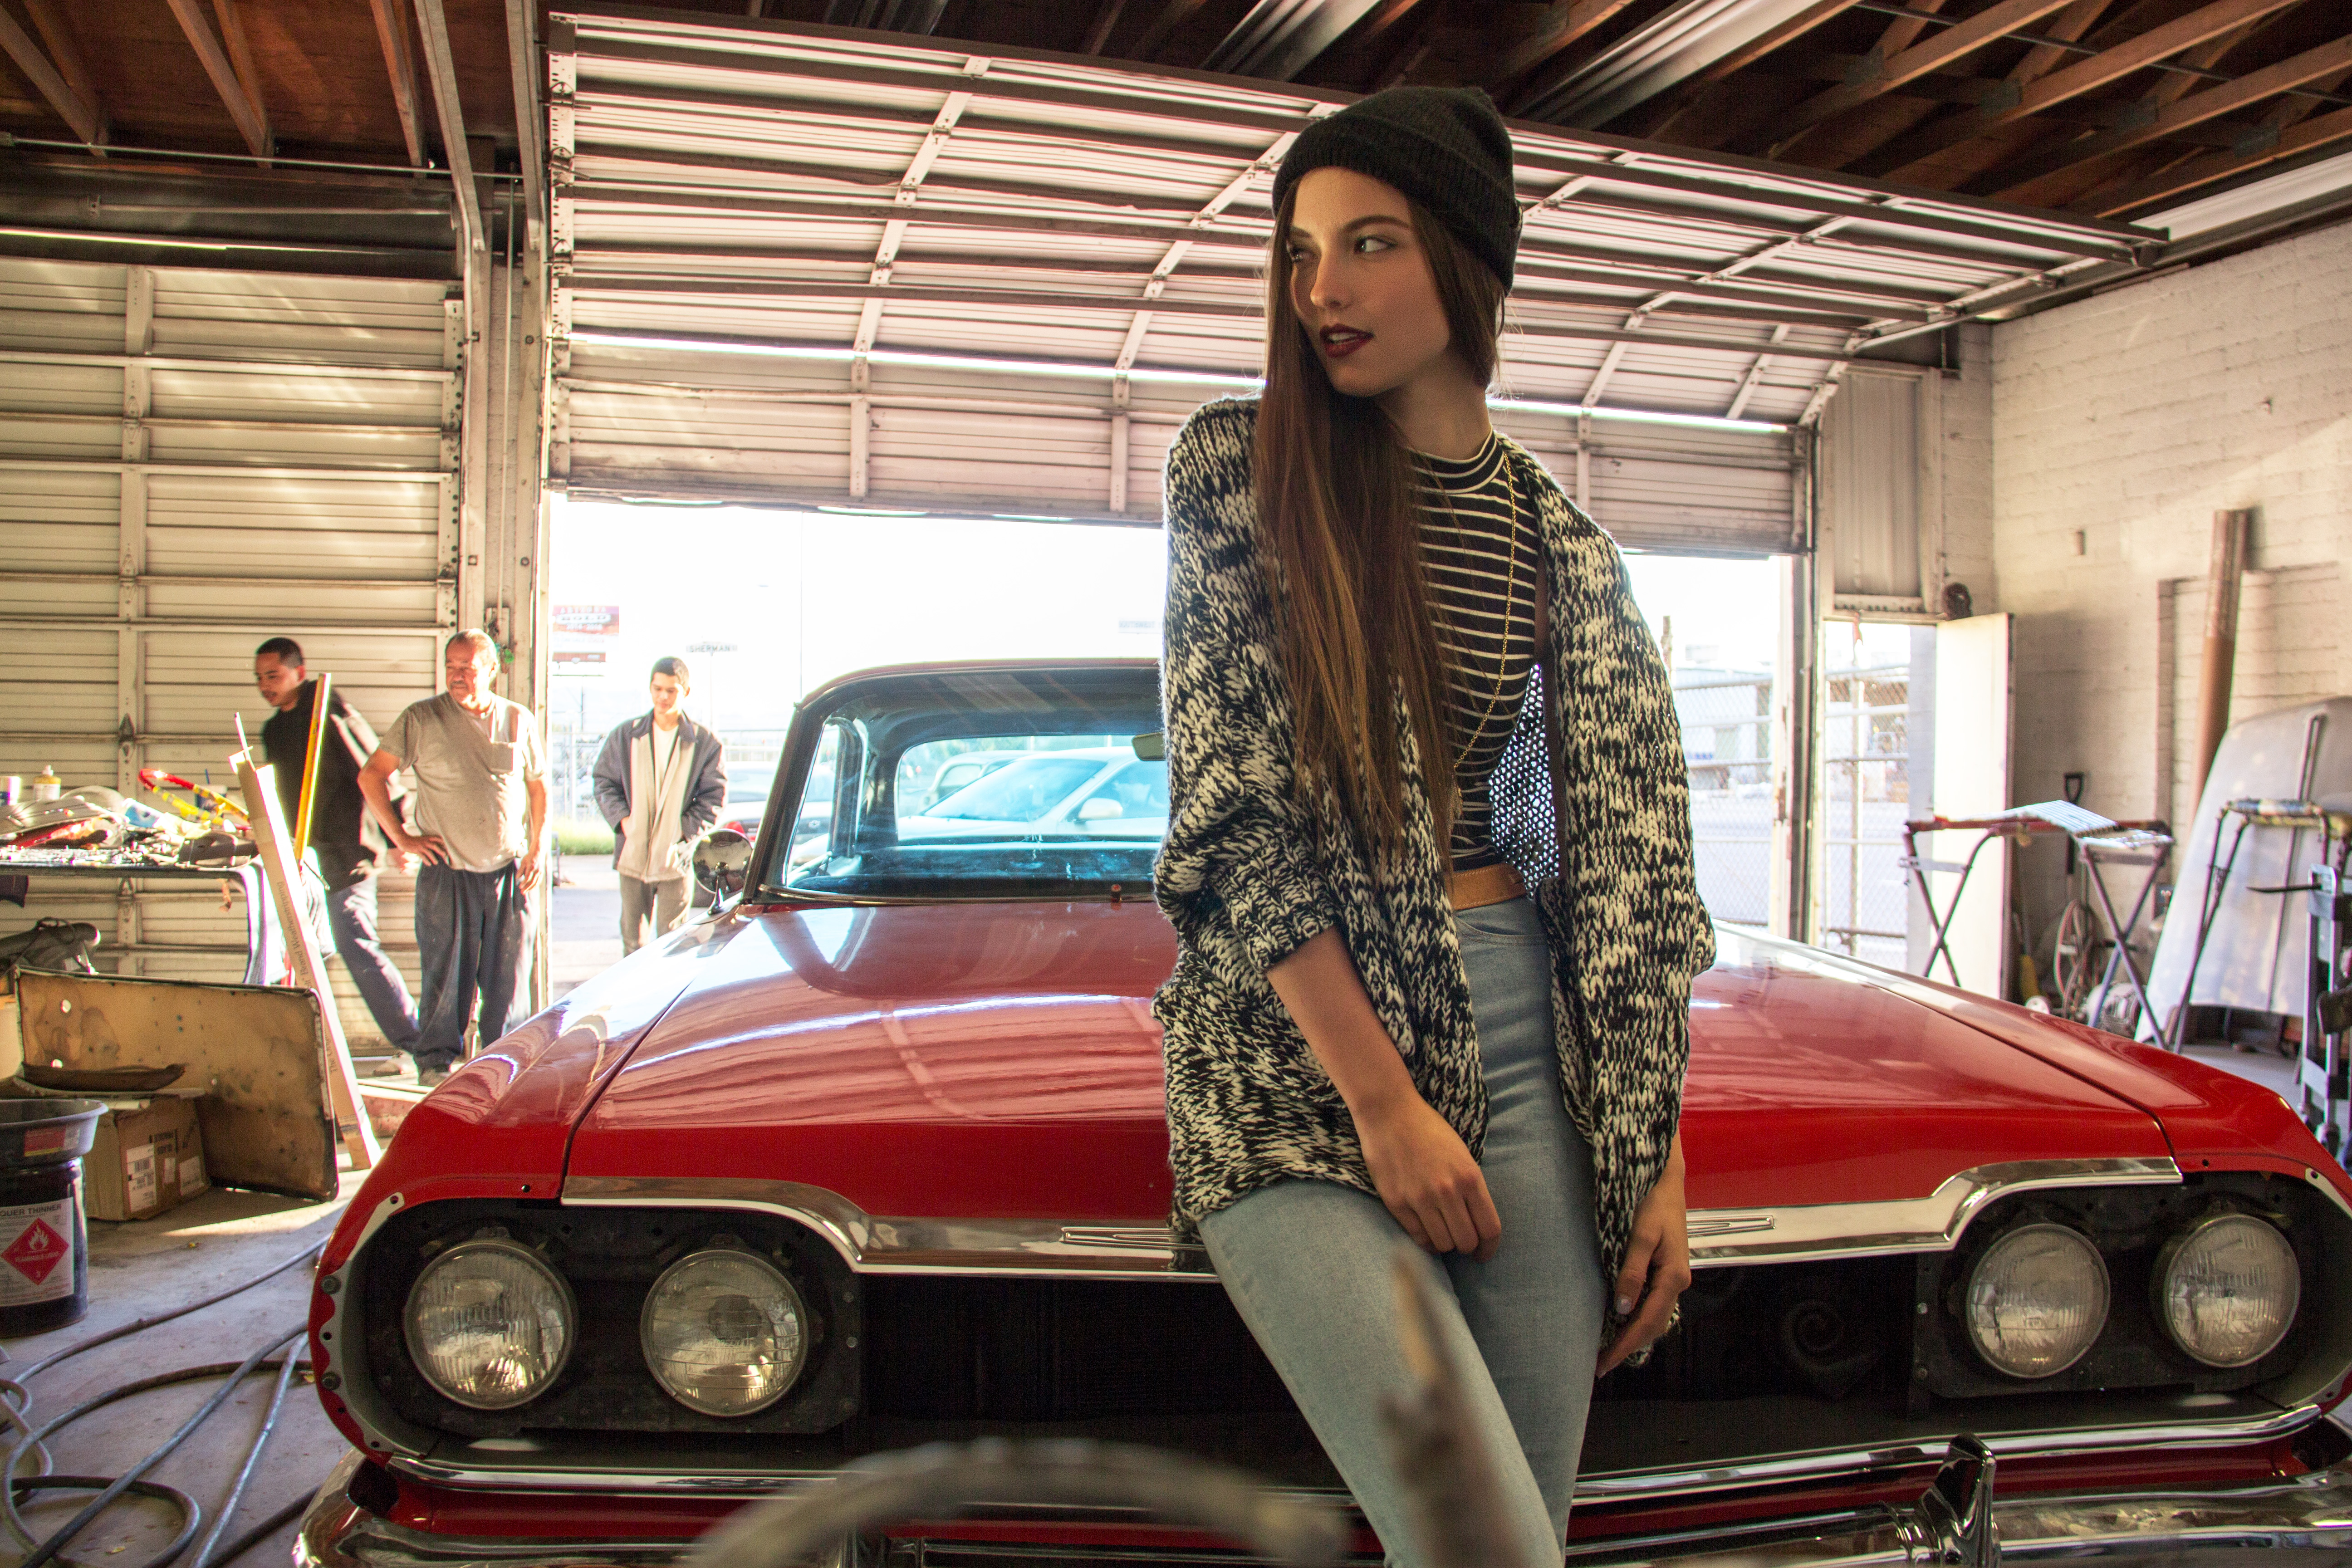 Savvy Taylor Model Hat Sweater Jeans Striped Clothing Brunette Long Hair Car Women With Cars 5184x3456